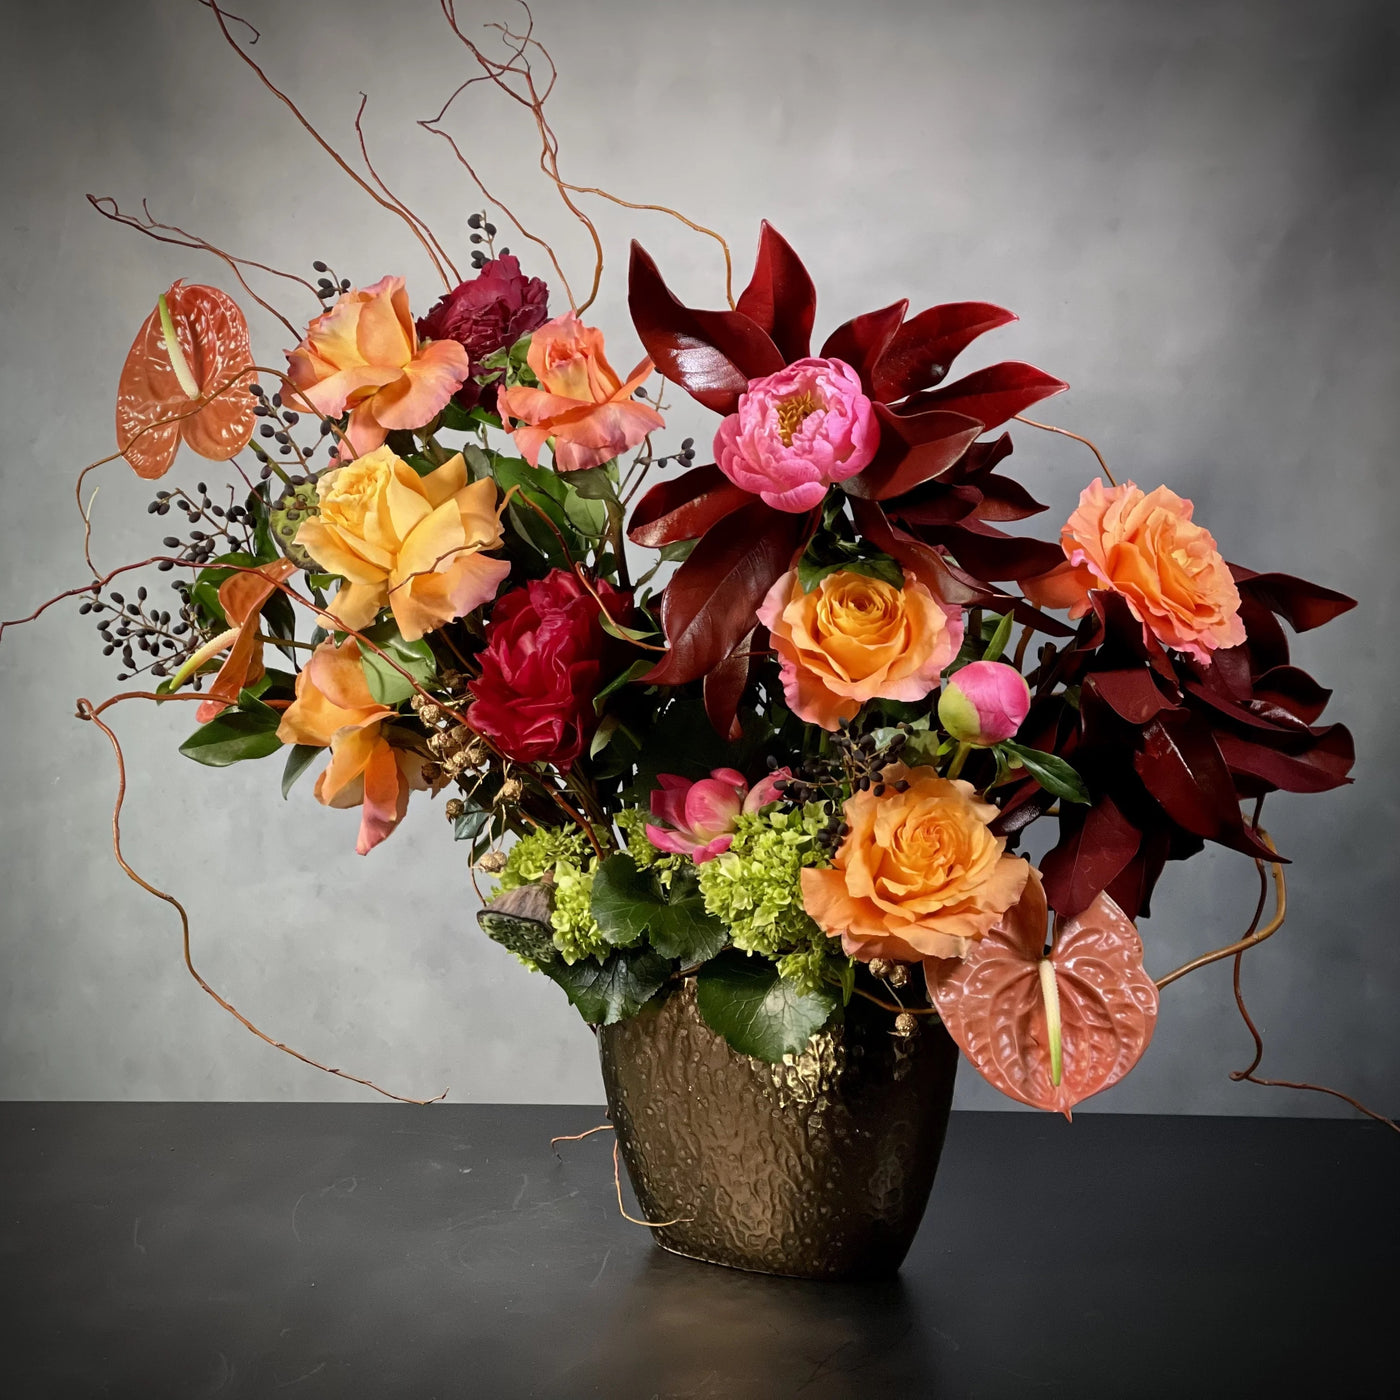 My Beverly Hills offers same day delivery for our Dashing arrangement. Placed in our bronze vase is Roses, Peonies, Hydrangeas and more seasonal blooms. A perfect way to say I love you and a wonderful gift for a birthday or if you're thinking of someone special. 